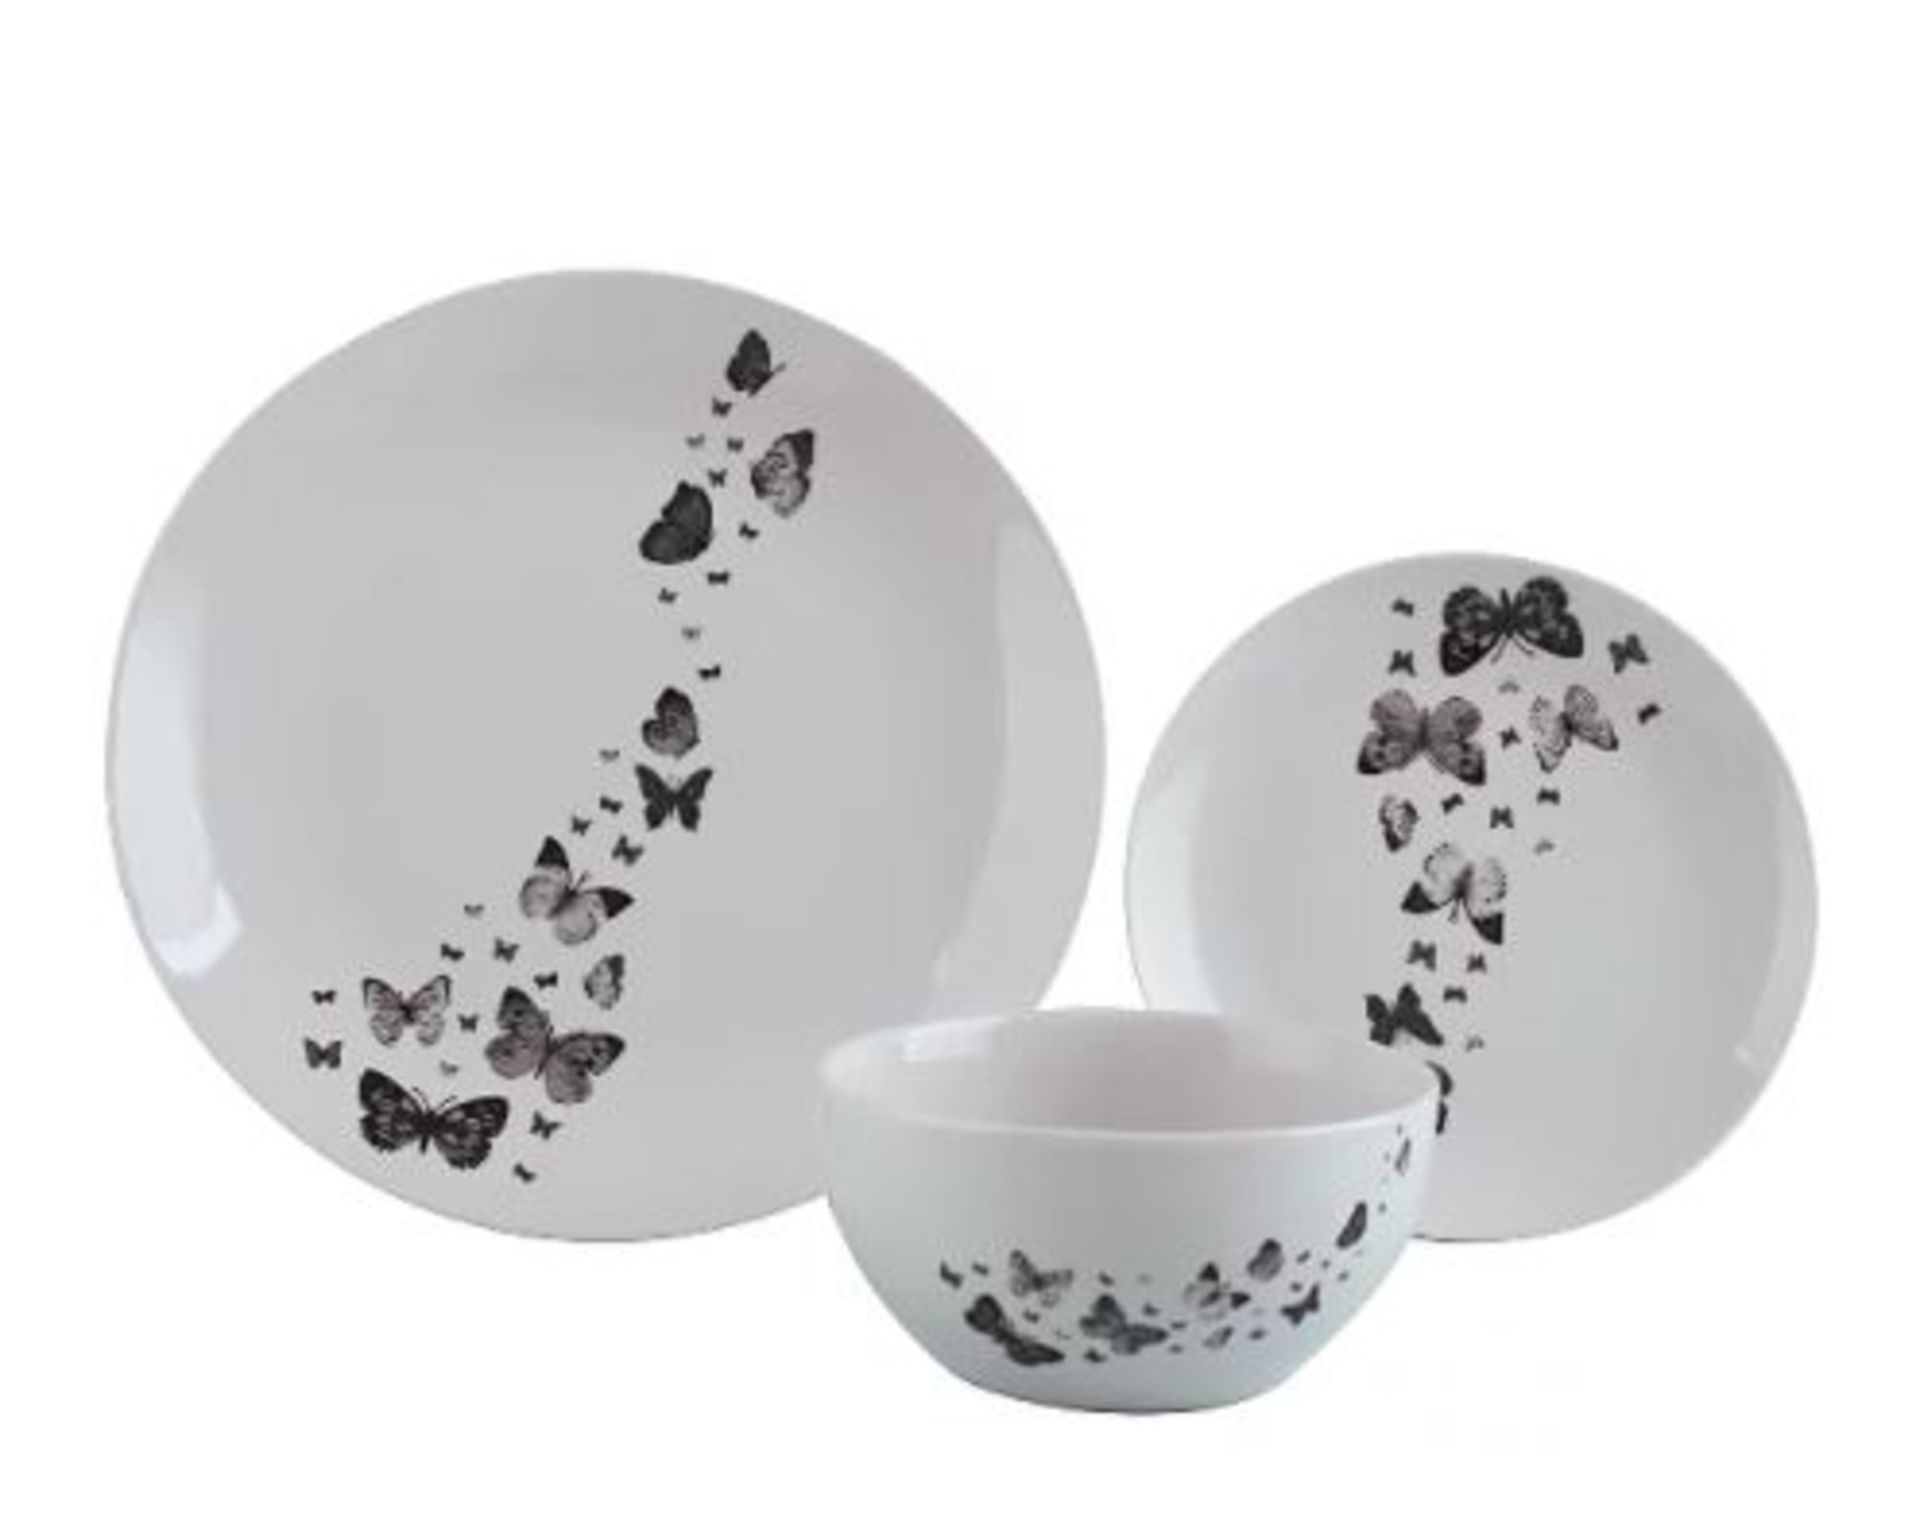 (15) Approx 85x Dinner Set Items. To Include 12 Piece Bunny Porcelain. 11 Piece Floral Porcelain & - Image 4 of 14